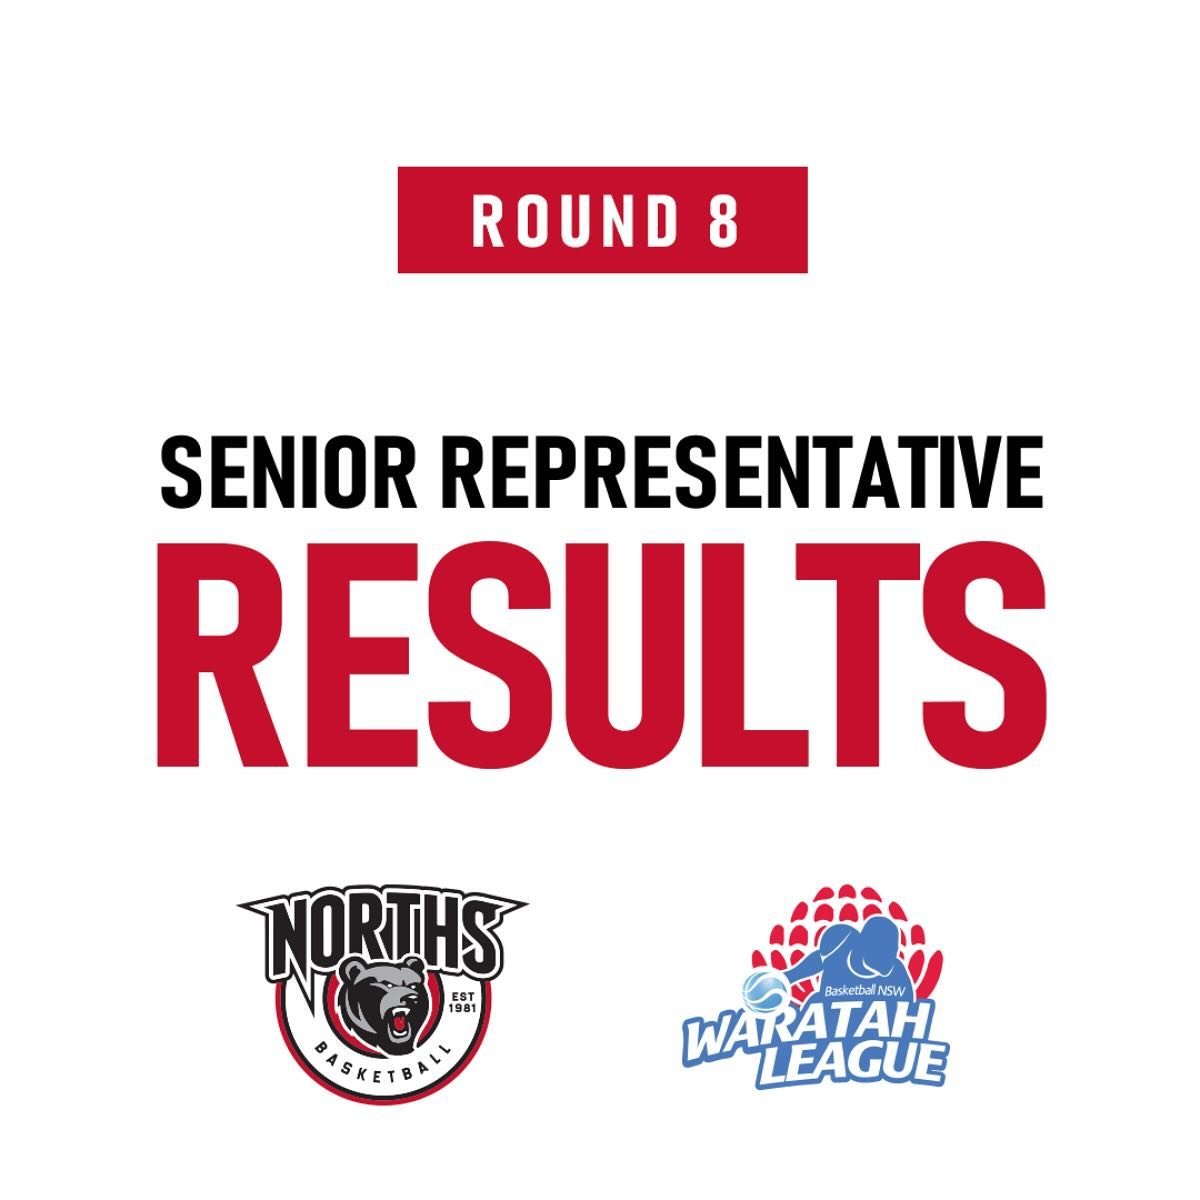 SENIOR REPRESENTATIVE RESULTS | ROUND 8 🏀

Our Waratah Youth League 1 Men came up with a tough away win in Round 8 over the Illawarra Hawks. The Bears currently sit in 6th place. on the YLM 1 Ladder.

YL Men 🏀

Norths 85 - Illawarra 73

K.Manzi | 2